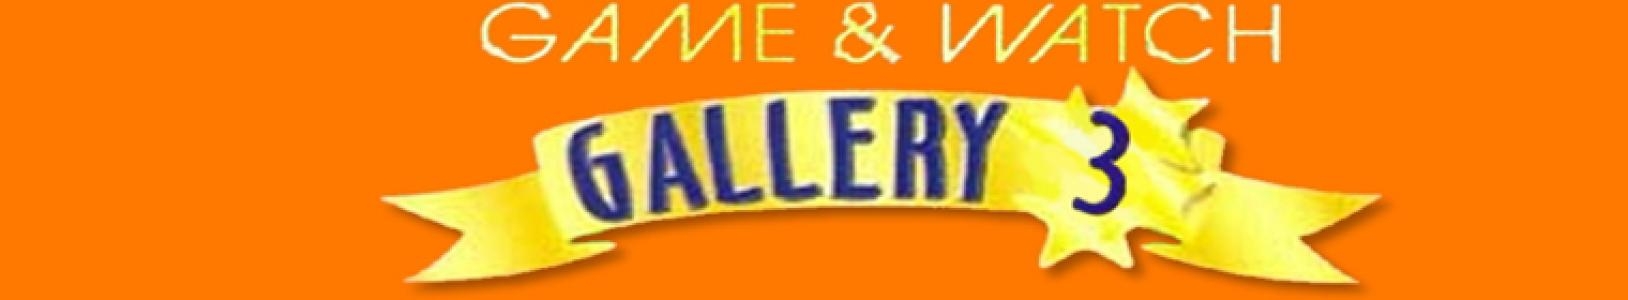 Game & Watch Gallery 3 banner